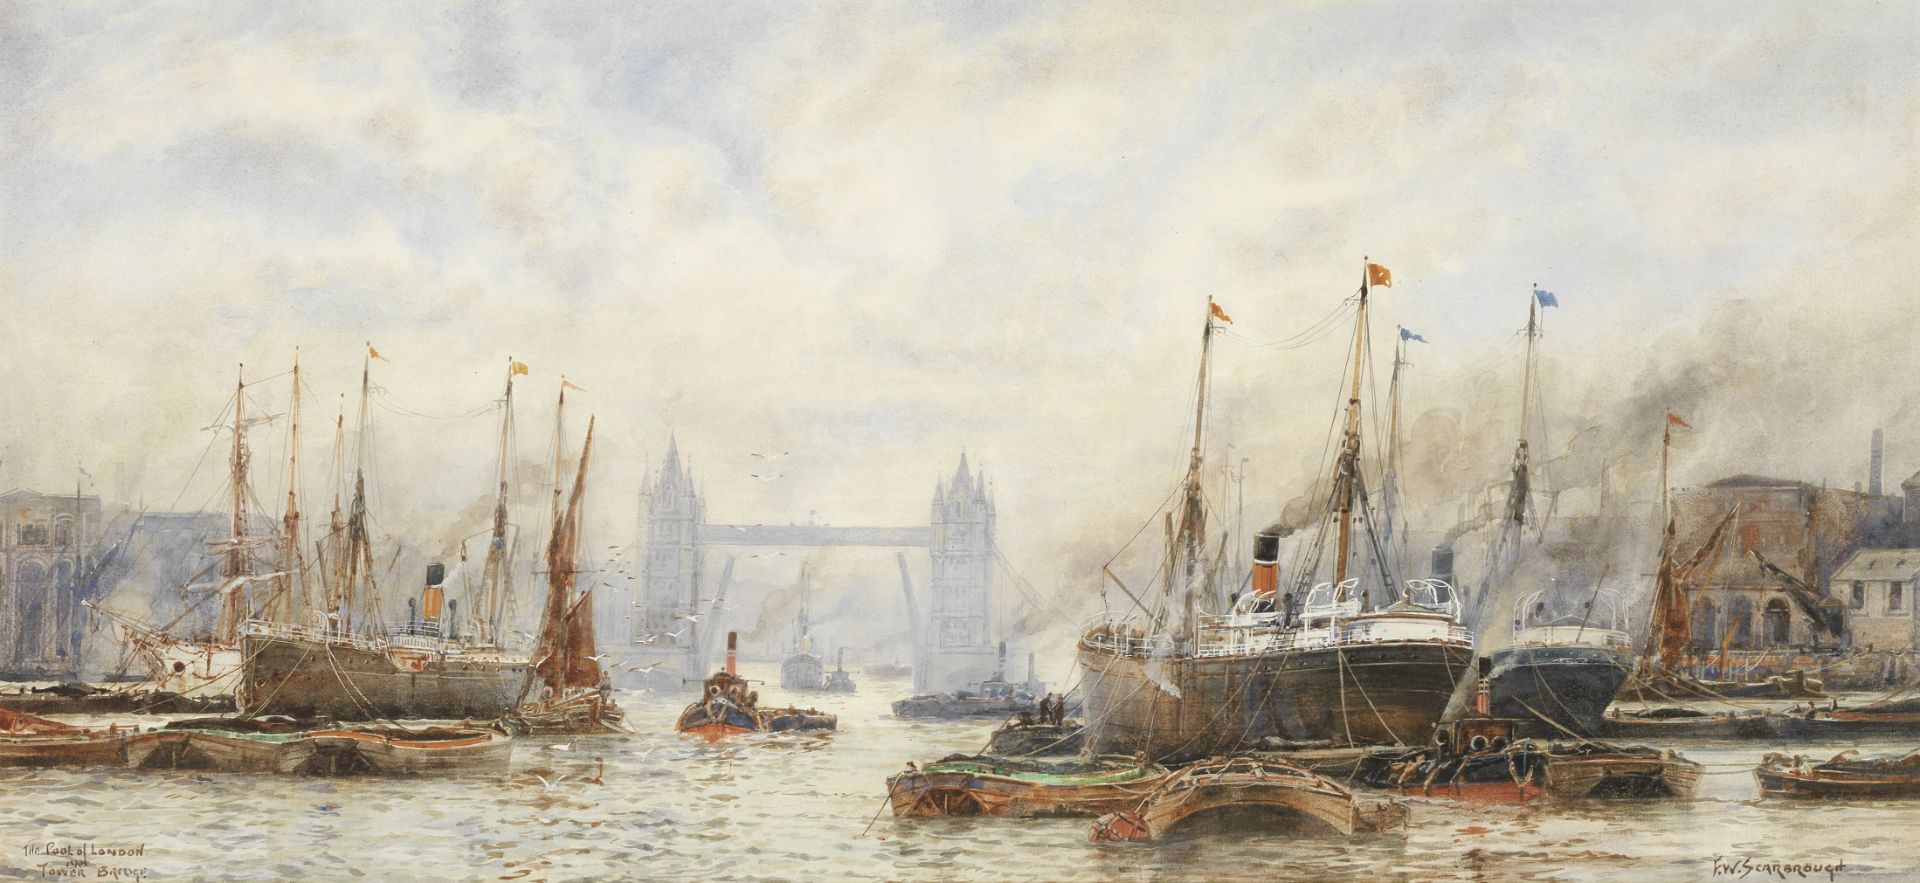 Frederick [Frank] William Scarbrough (British, 1863-1945) 'The Pool of London and Tower Bridge'